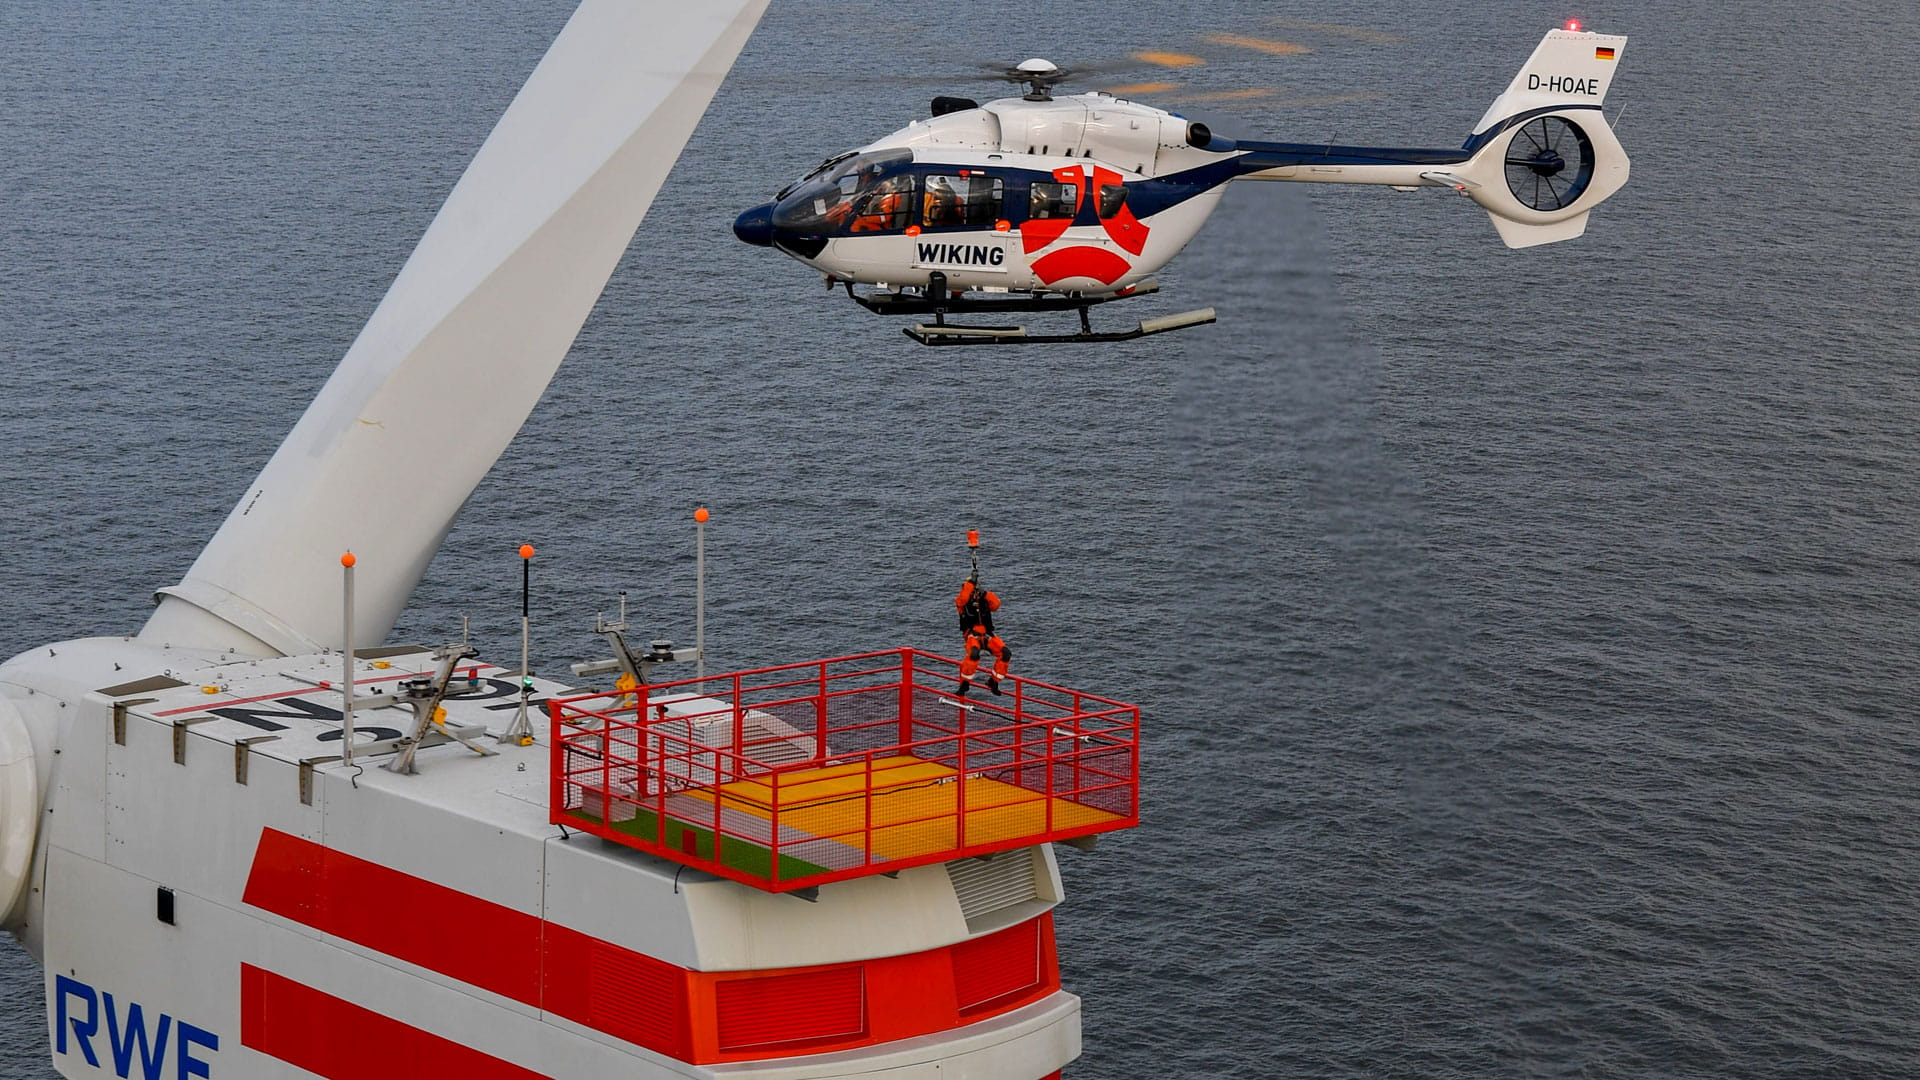 A helicopter lowers a man down to a platform using a hoist.